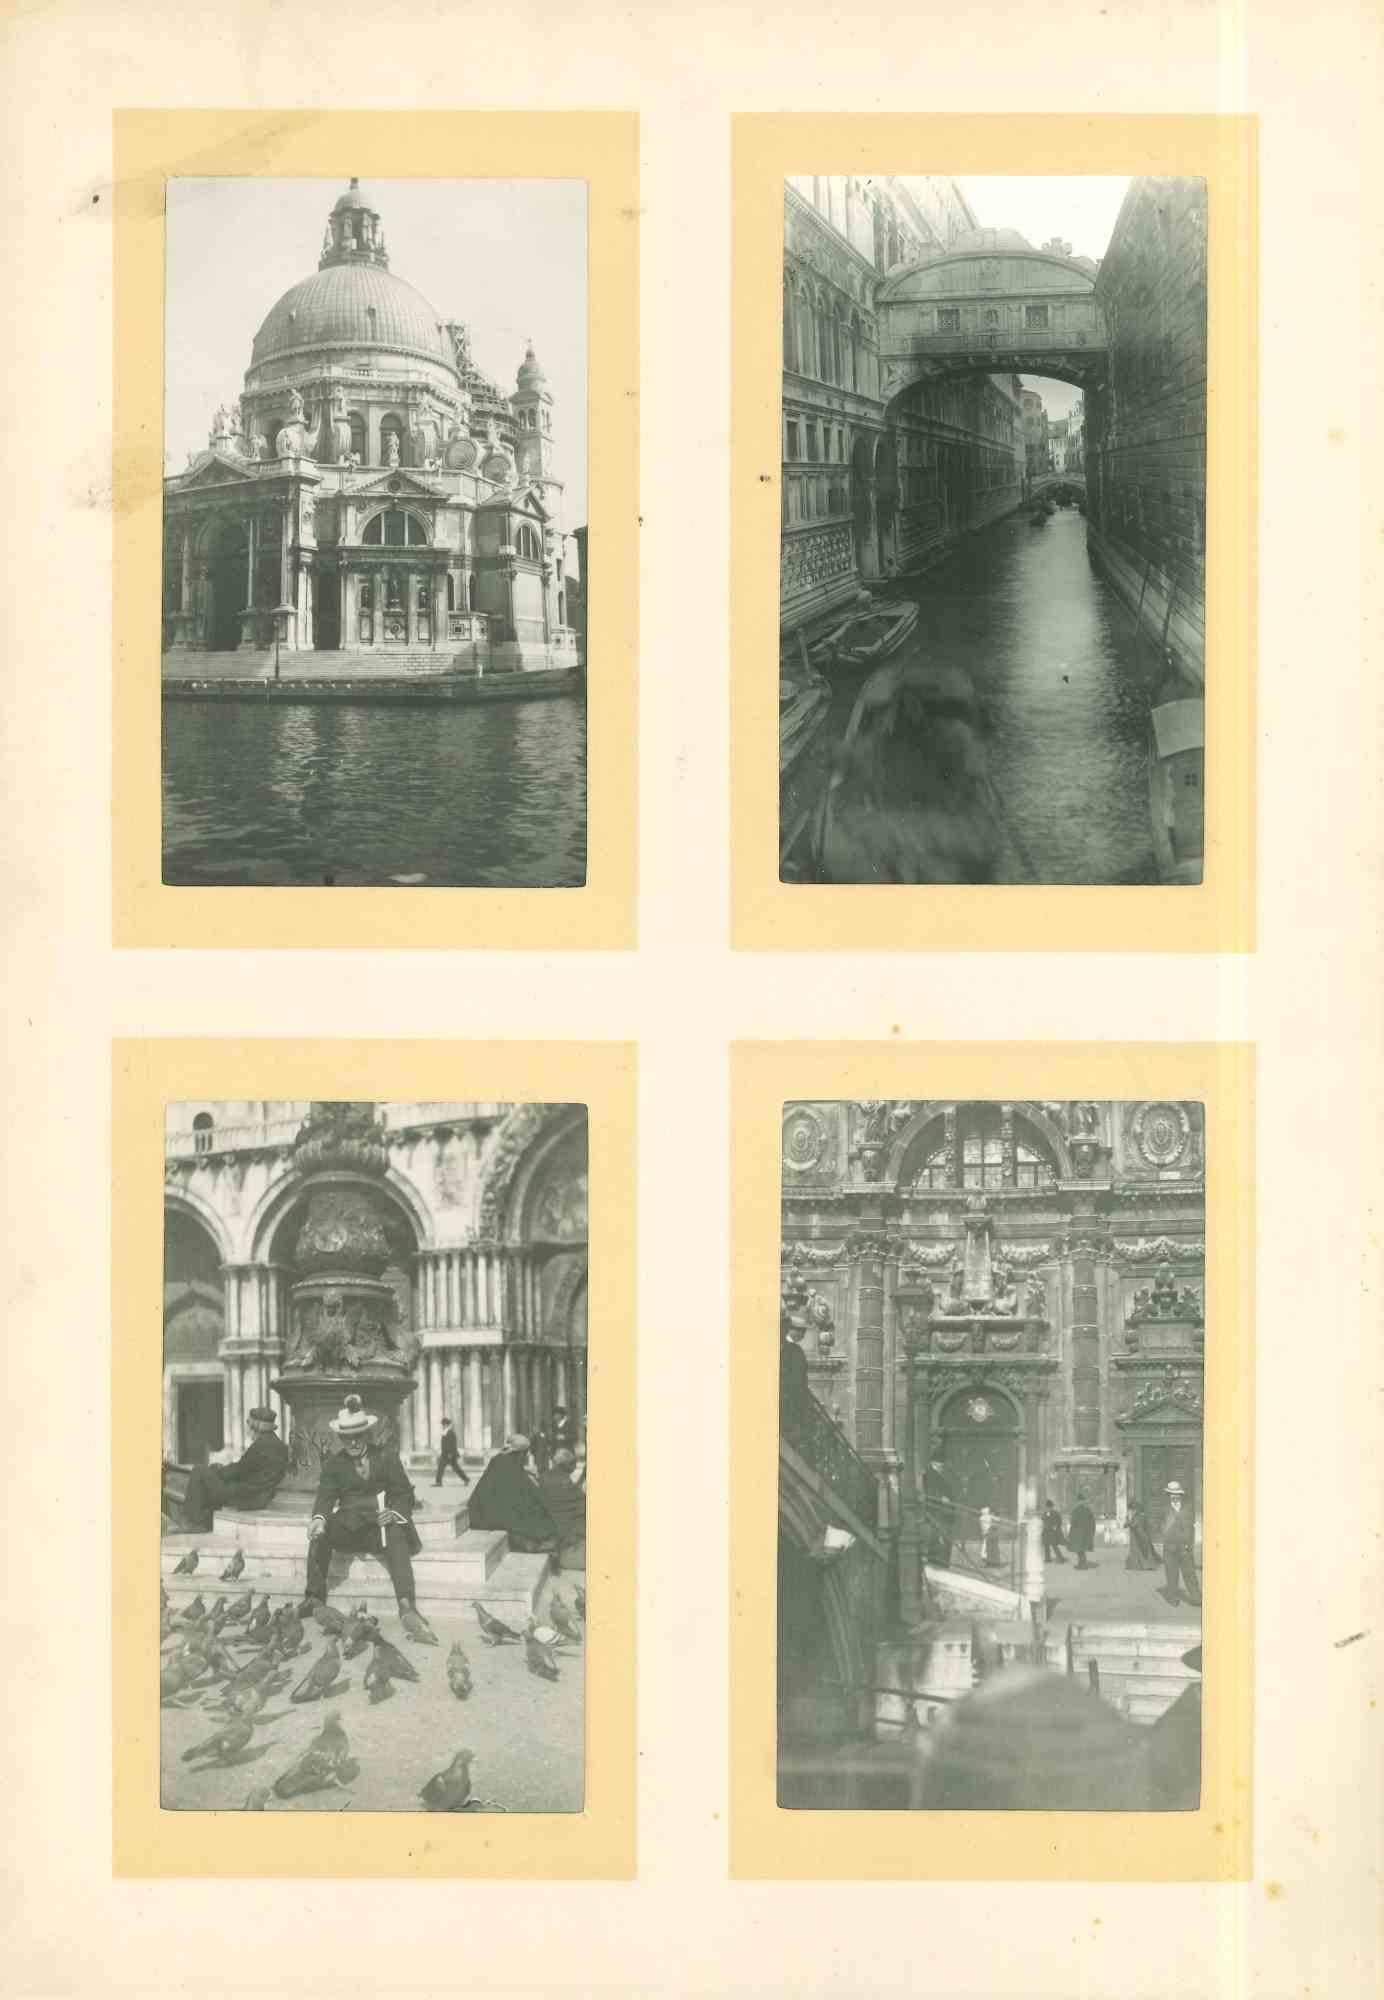 Unknown Figurative Photograph - Views of Venice and Northern Africa - Vintage Photograph - Early 20th Century